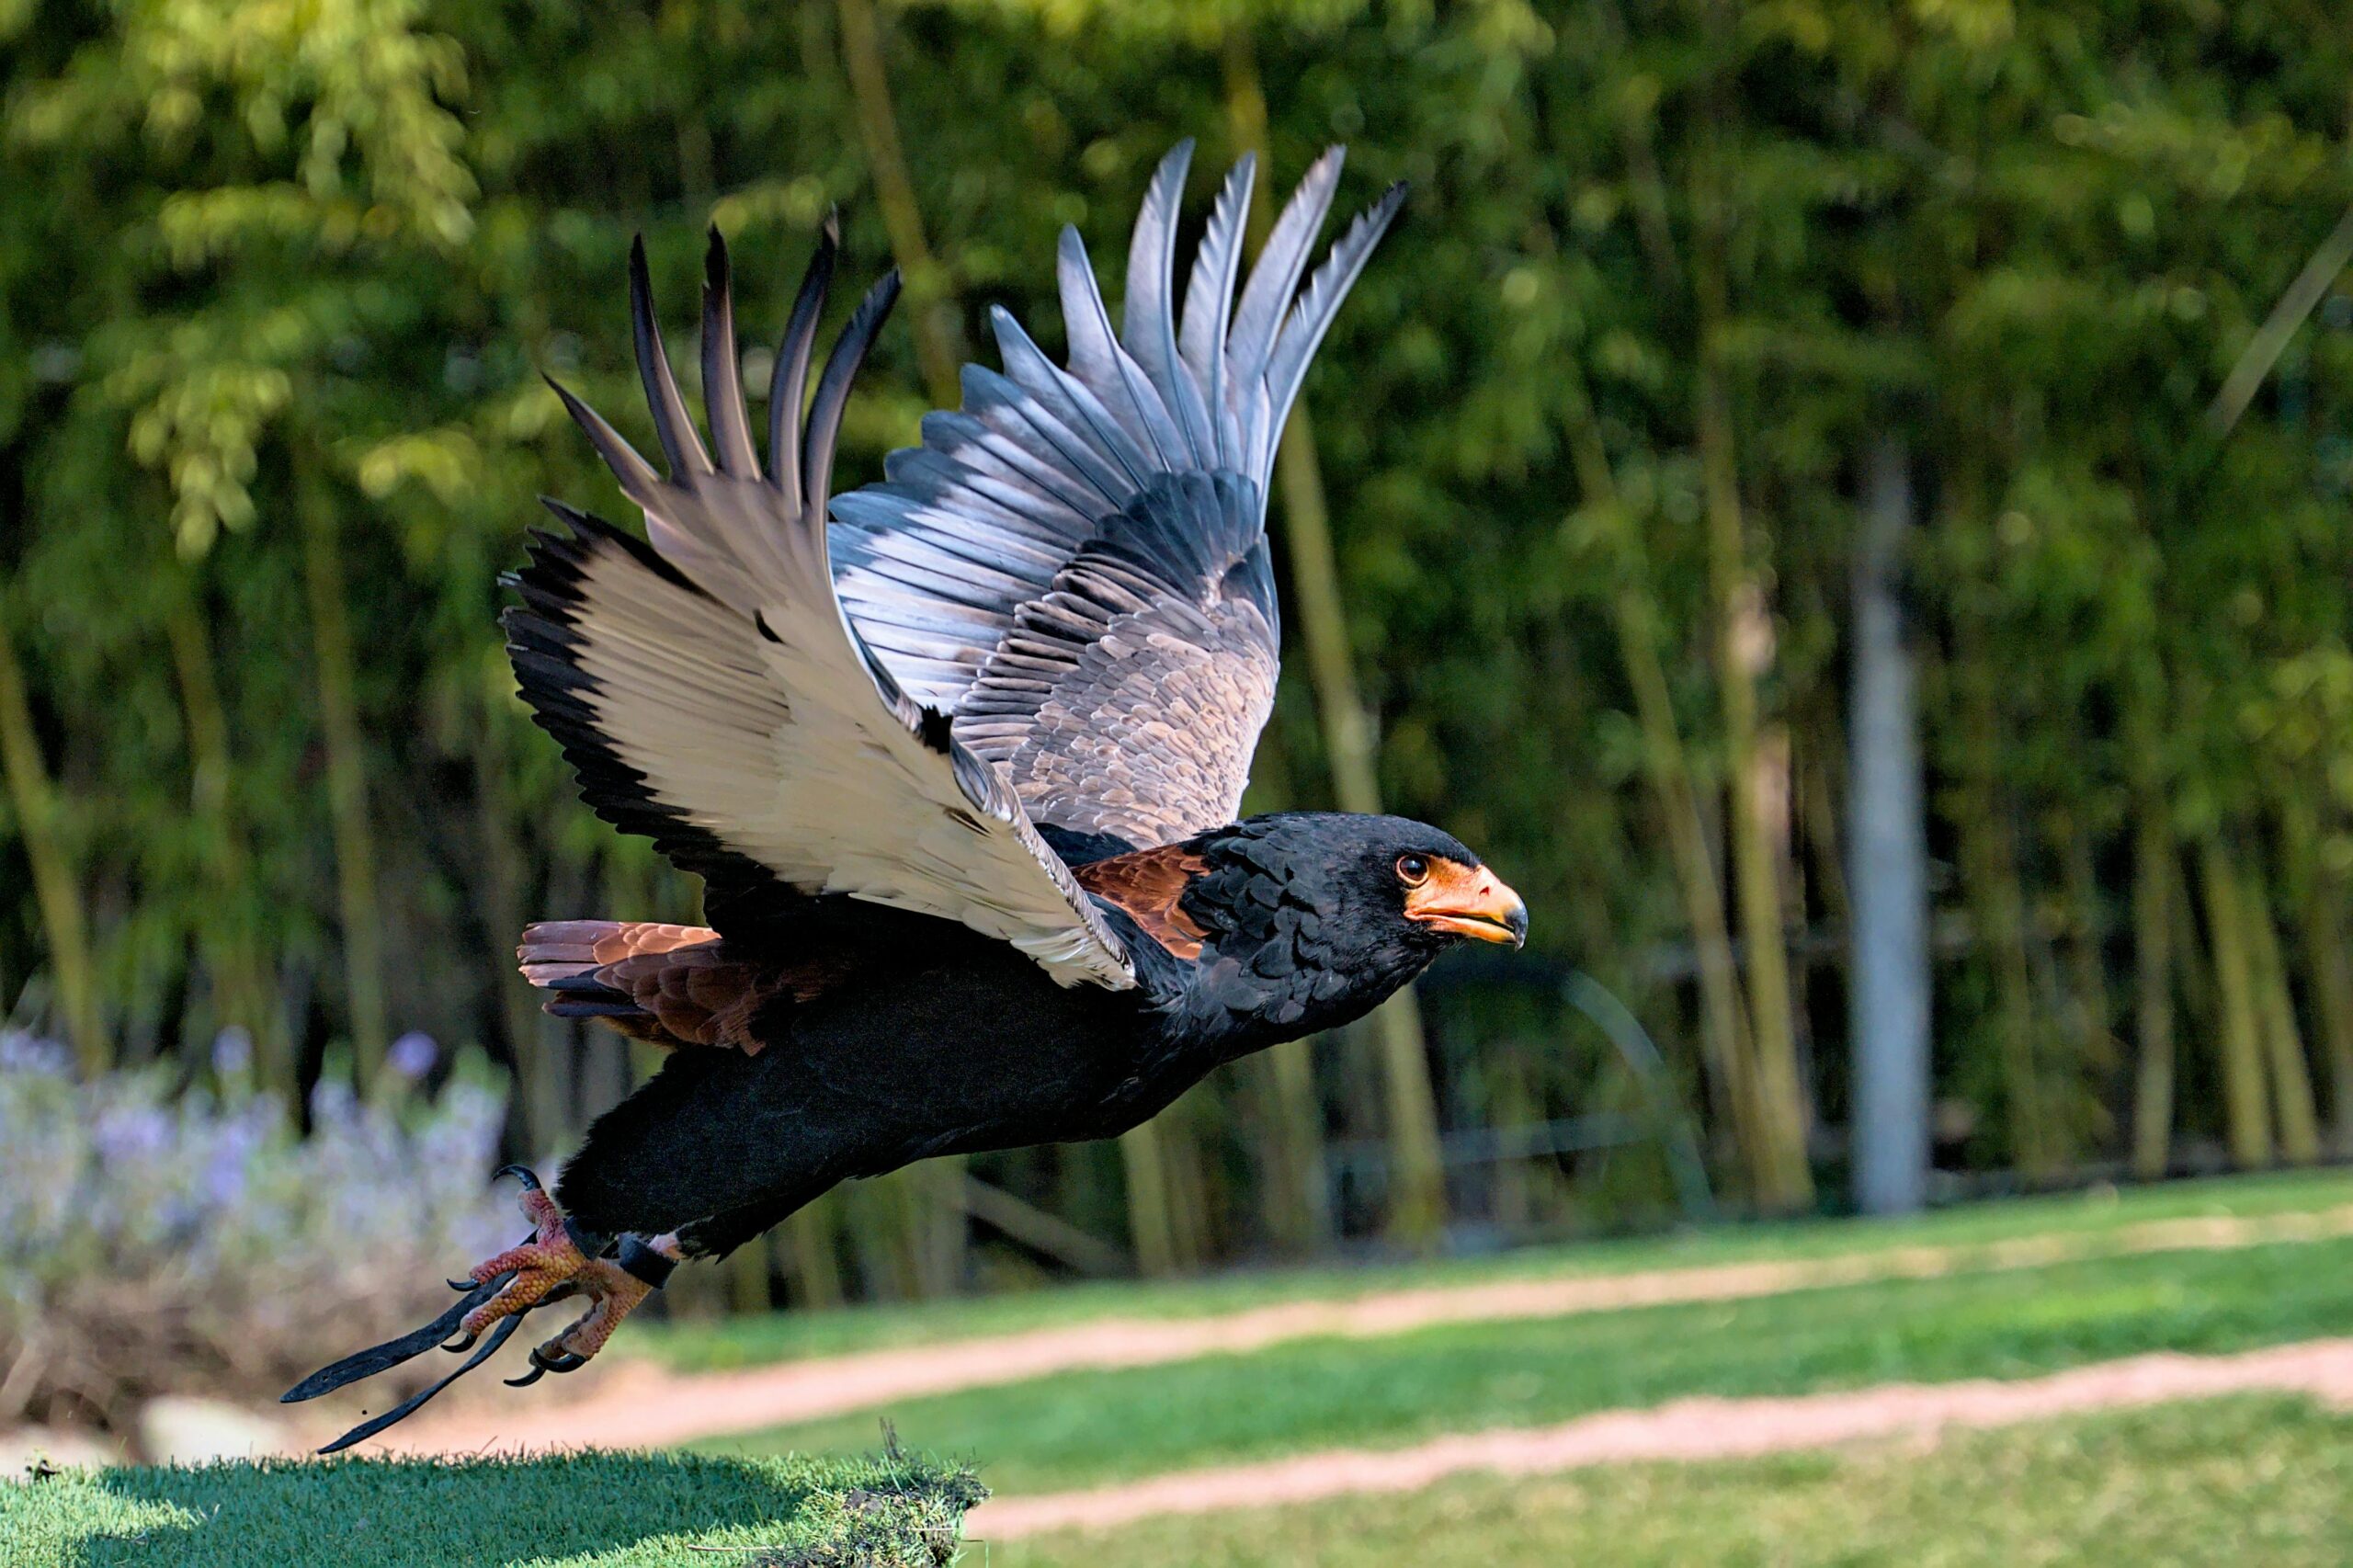 can bateleur eagles see at night